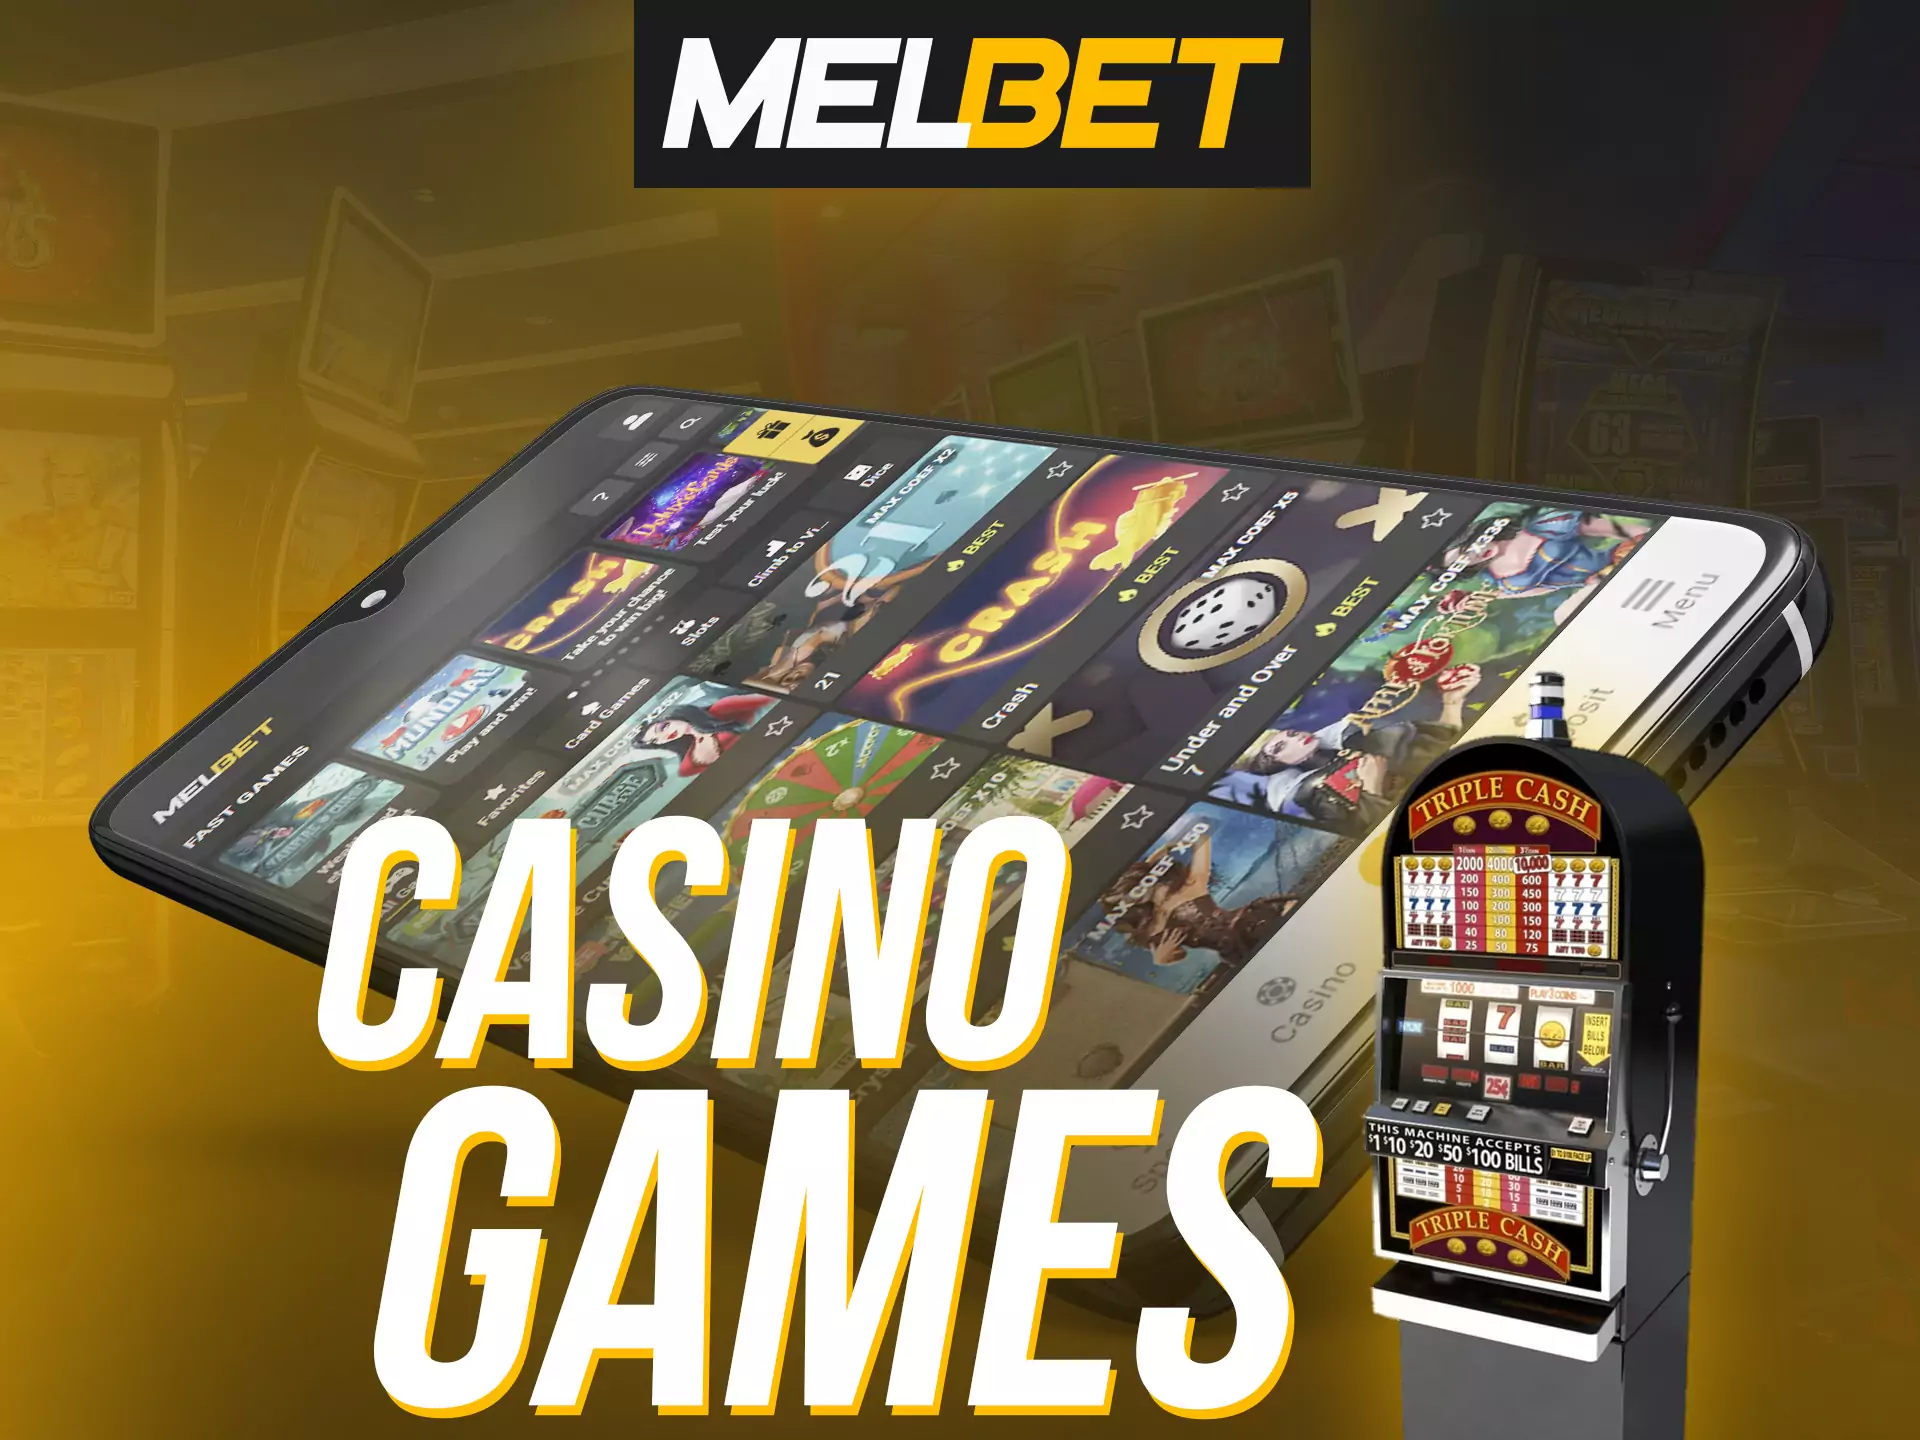 In the Melbet app you can play casino games.